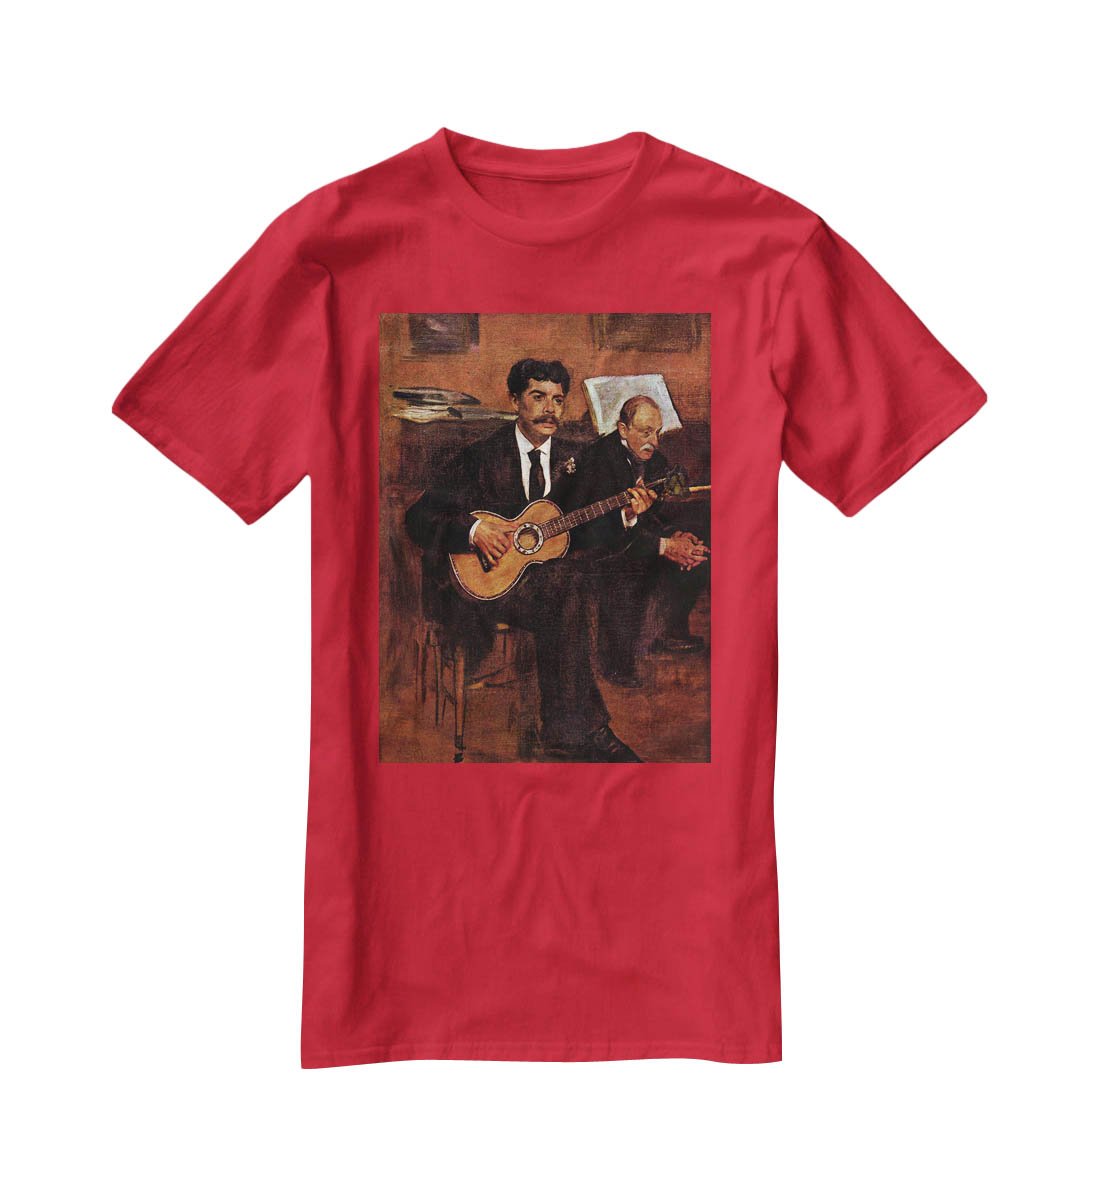 The guitarist Pagans and Monsieur Degas by Manet T-Shirt - Canvas Art Rocks - 4